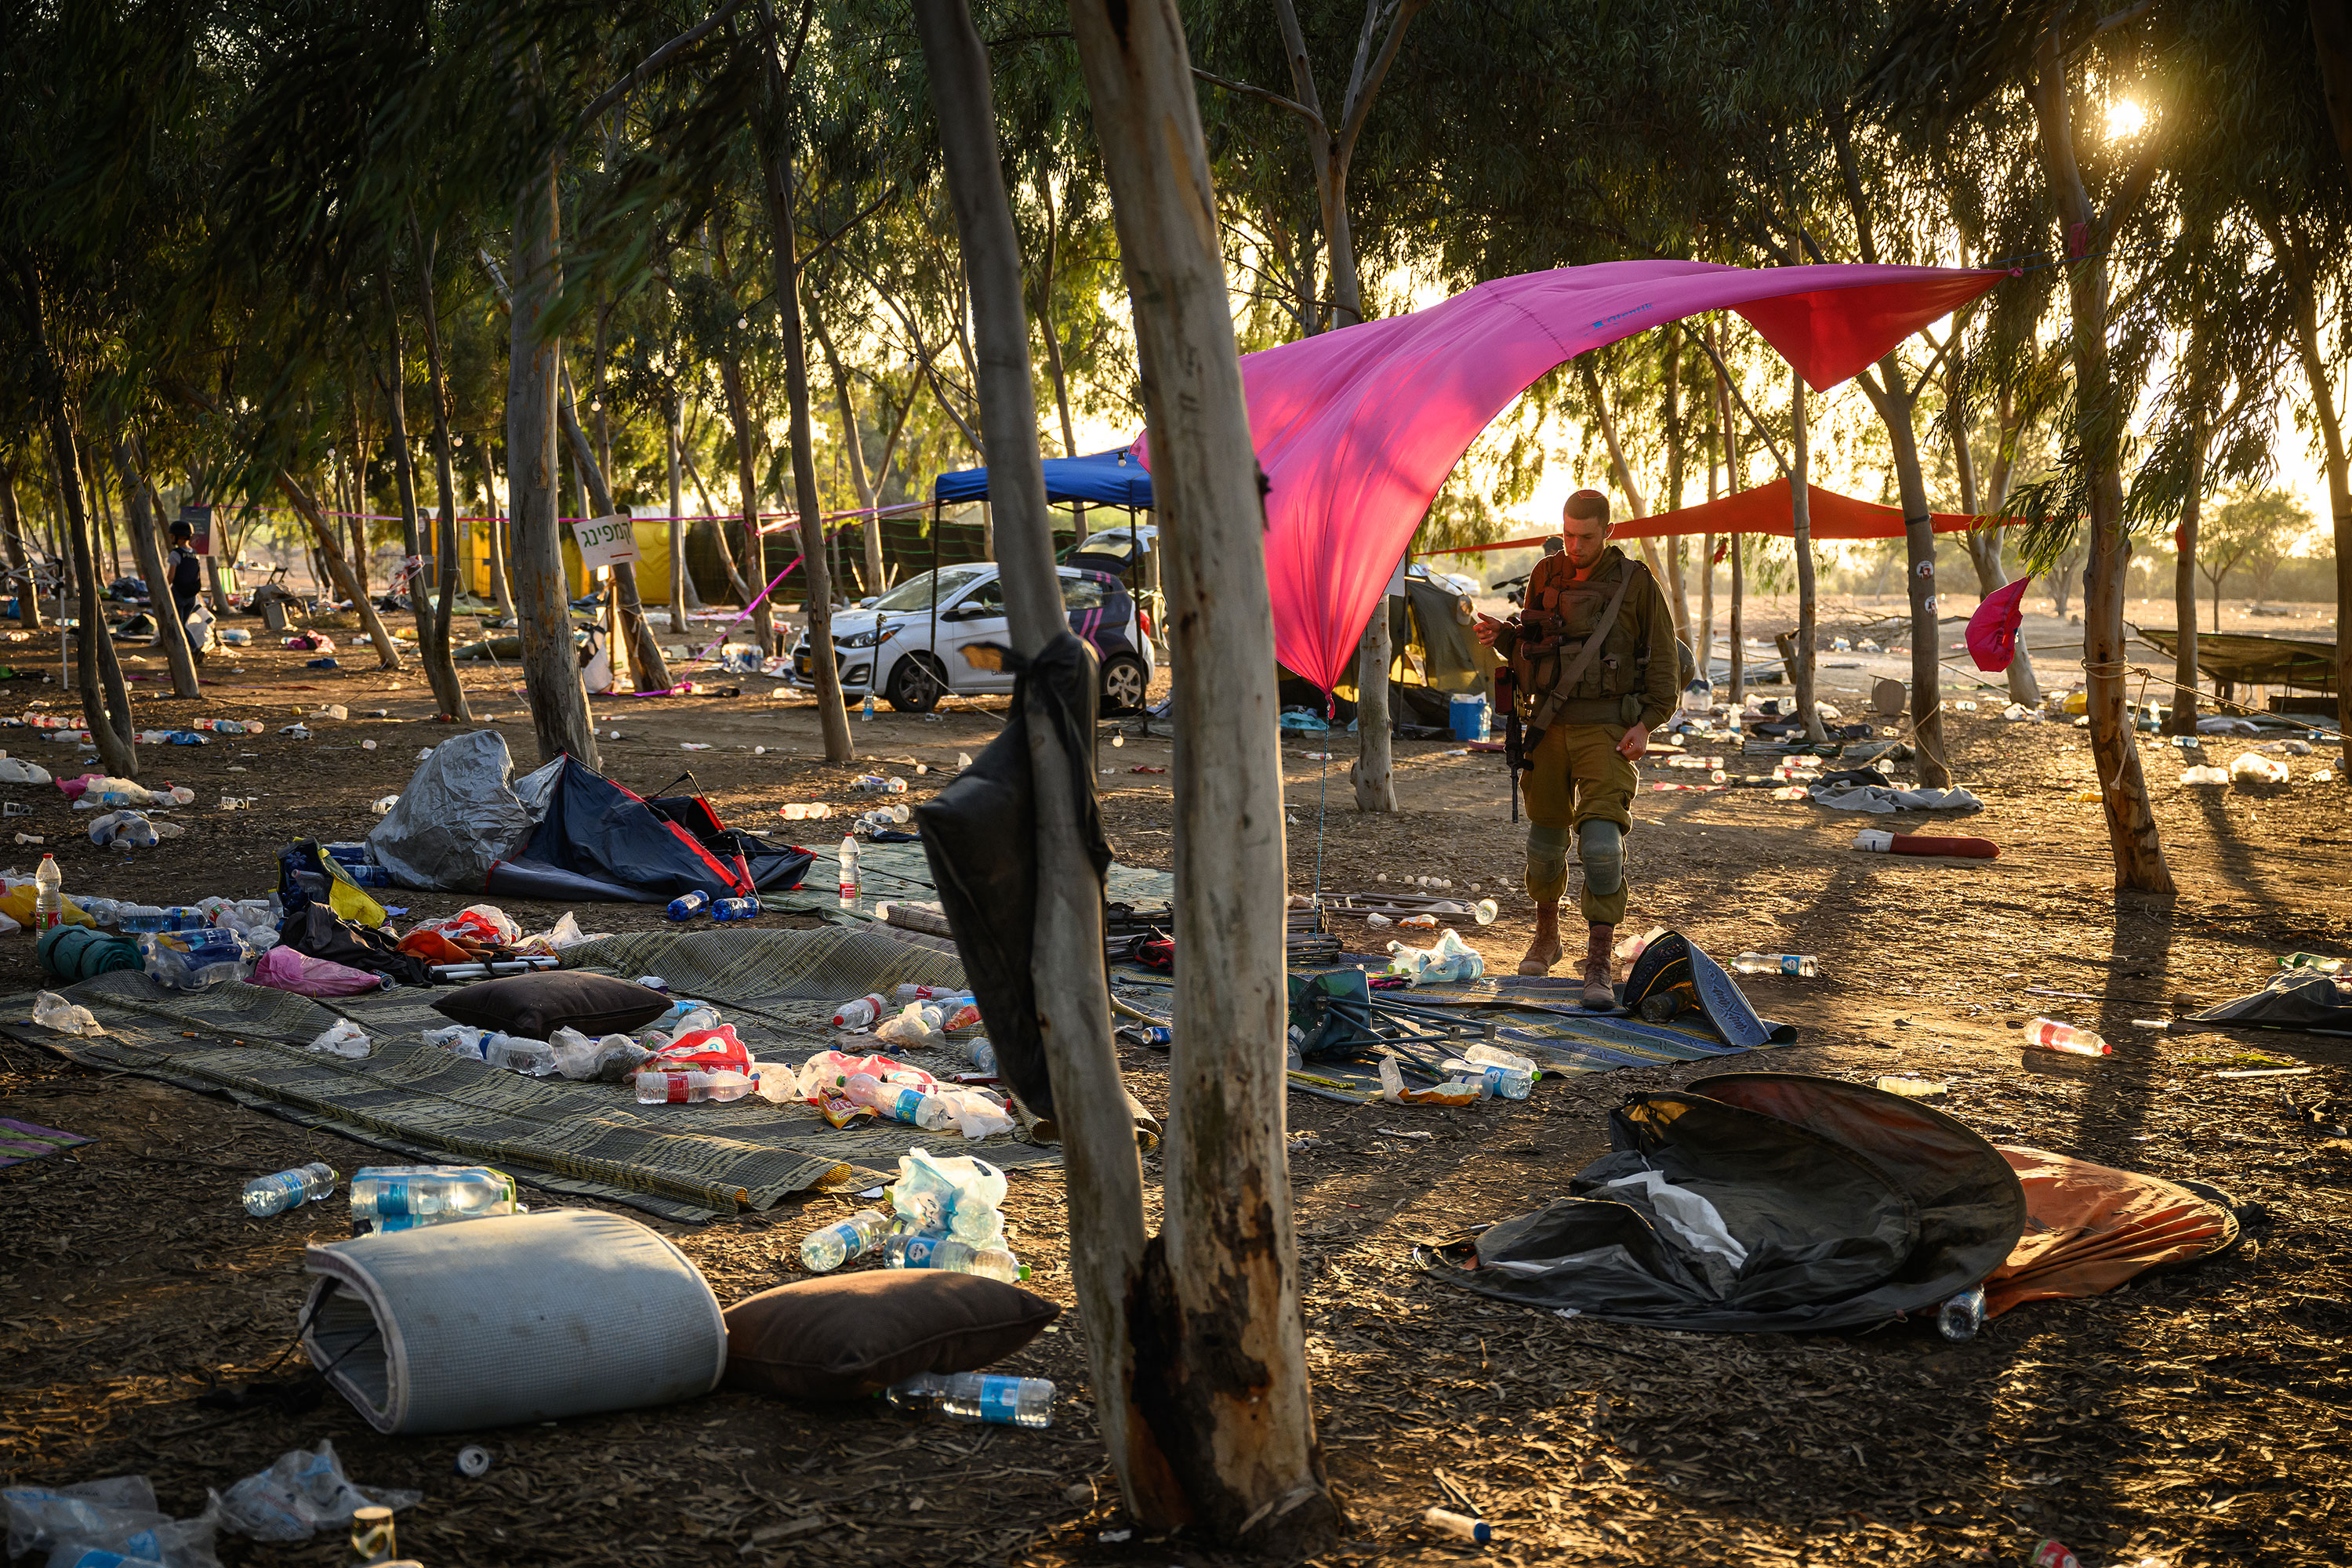 Security forces search for identification and personal effects at the Supernova Music Festival site on October 12 in Kibbutz Re'im, Israel, where hundreds were killed and dozens taken by Hamas militants near the border with Gaza.